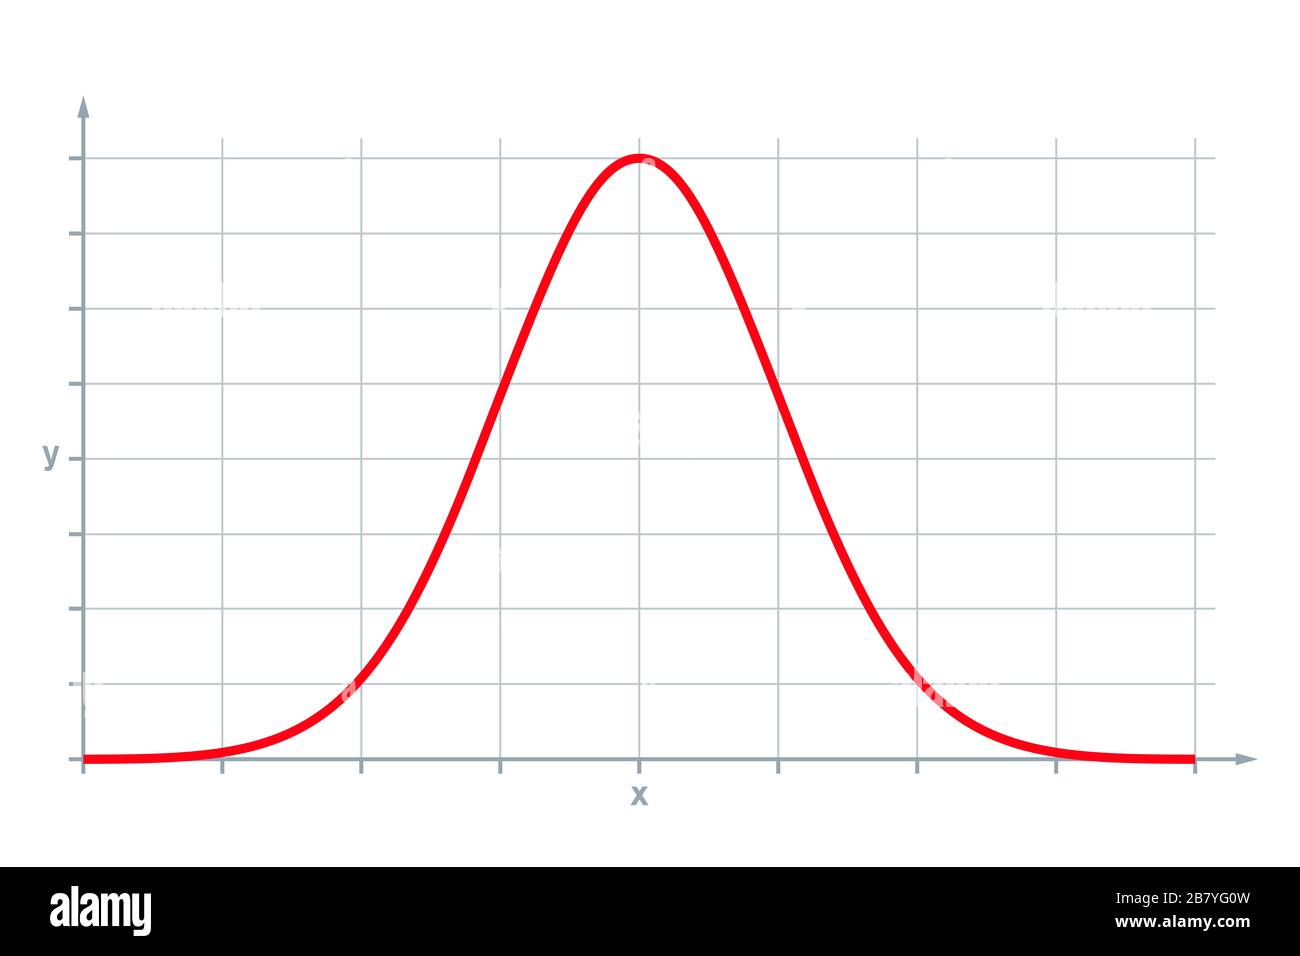 Standard normal distribution, also Gaussian distribution or bell curve. Used in statistics and in natural and social sciences. Stock Photo